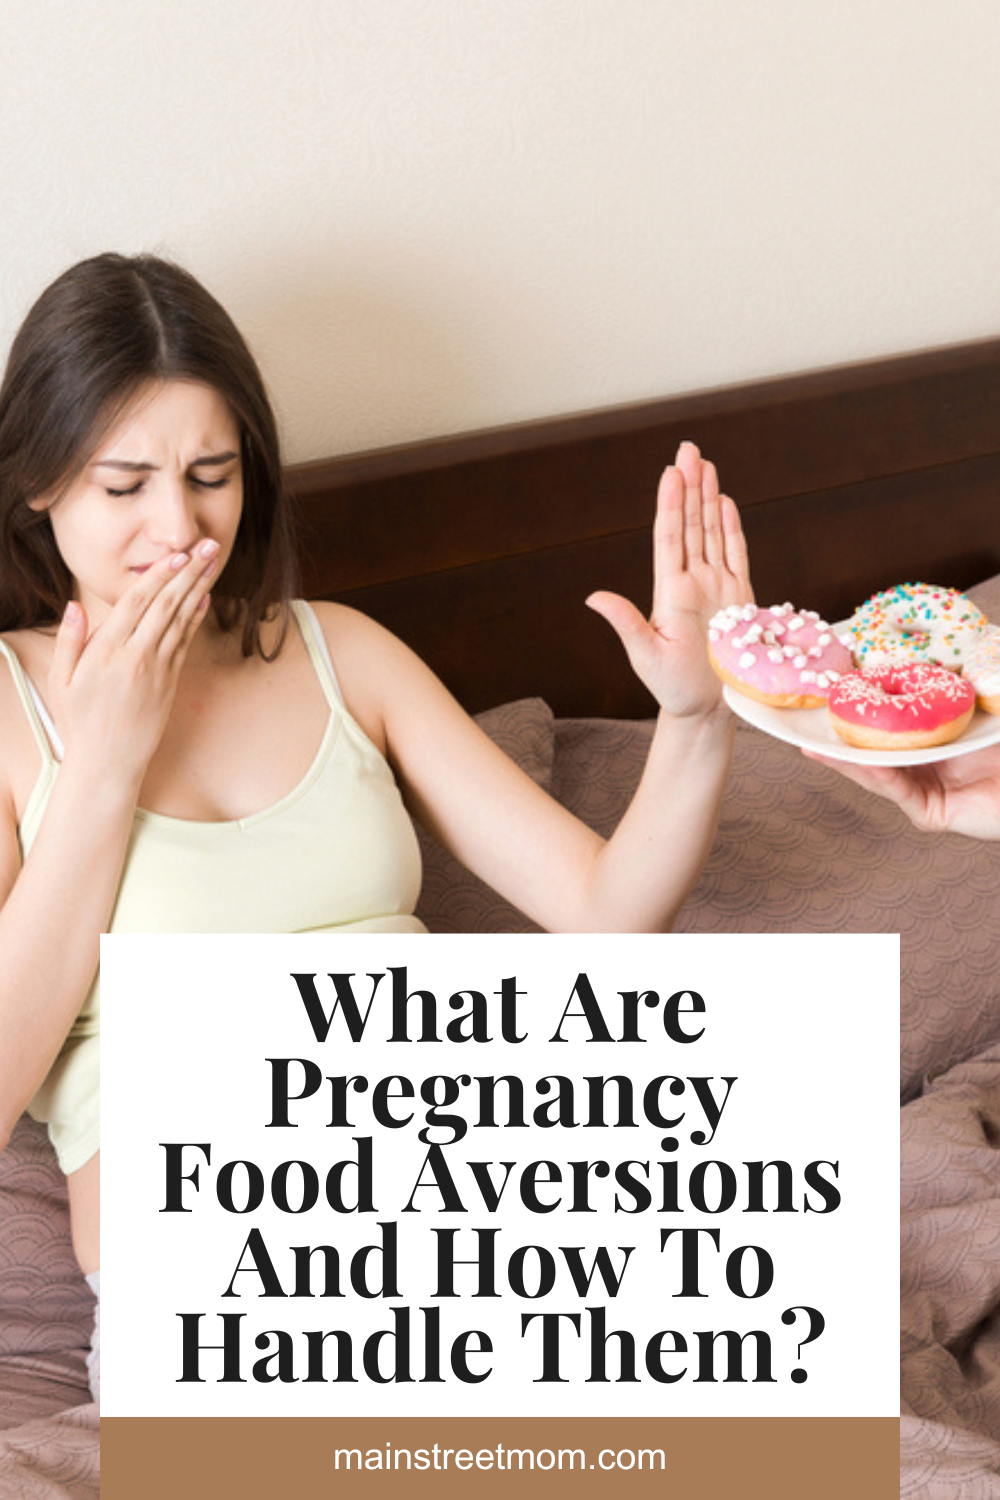 What Are Pregnancy Food Aversions And How To Handle Them?